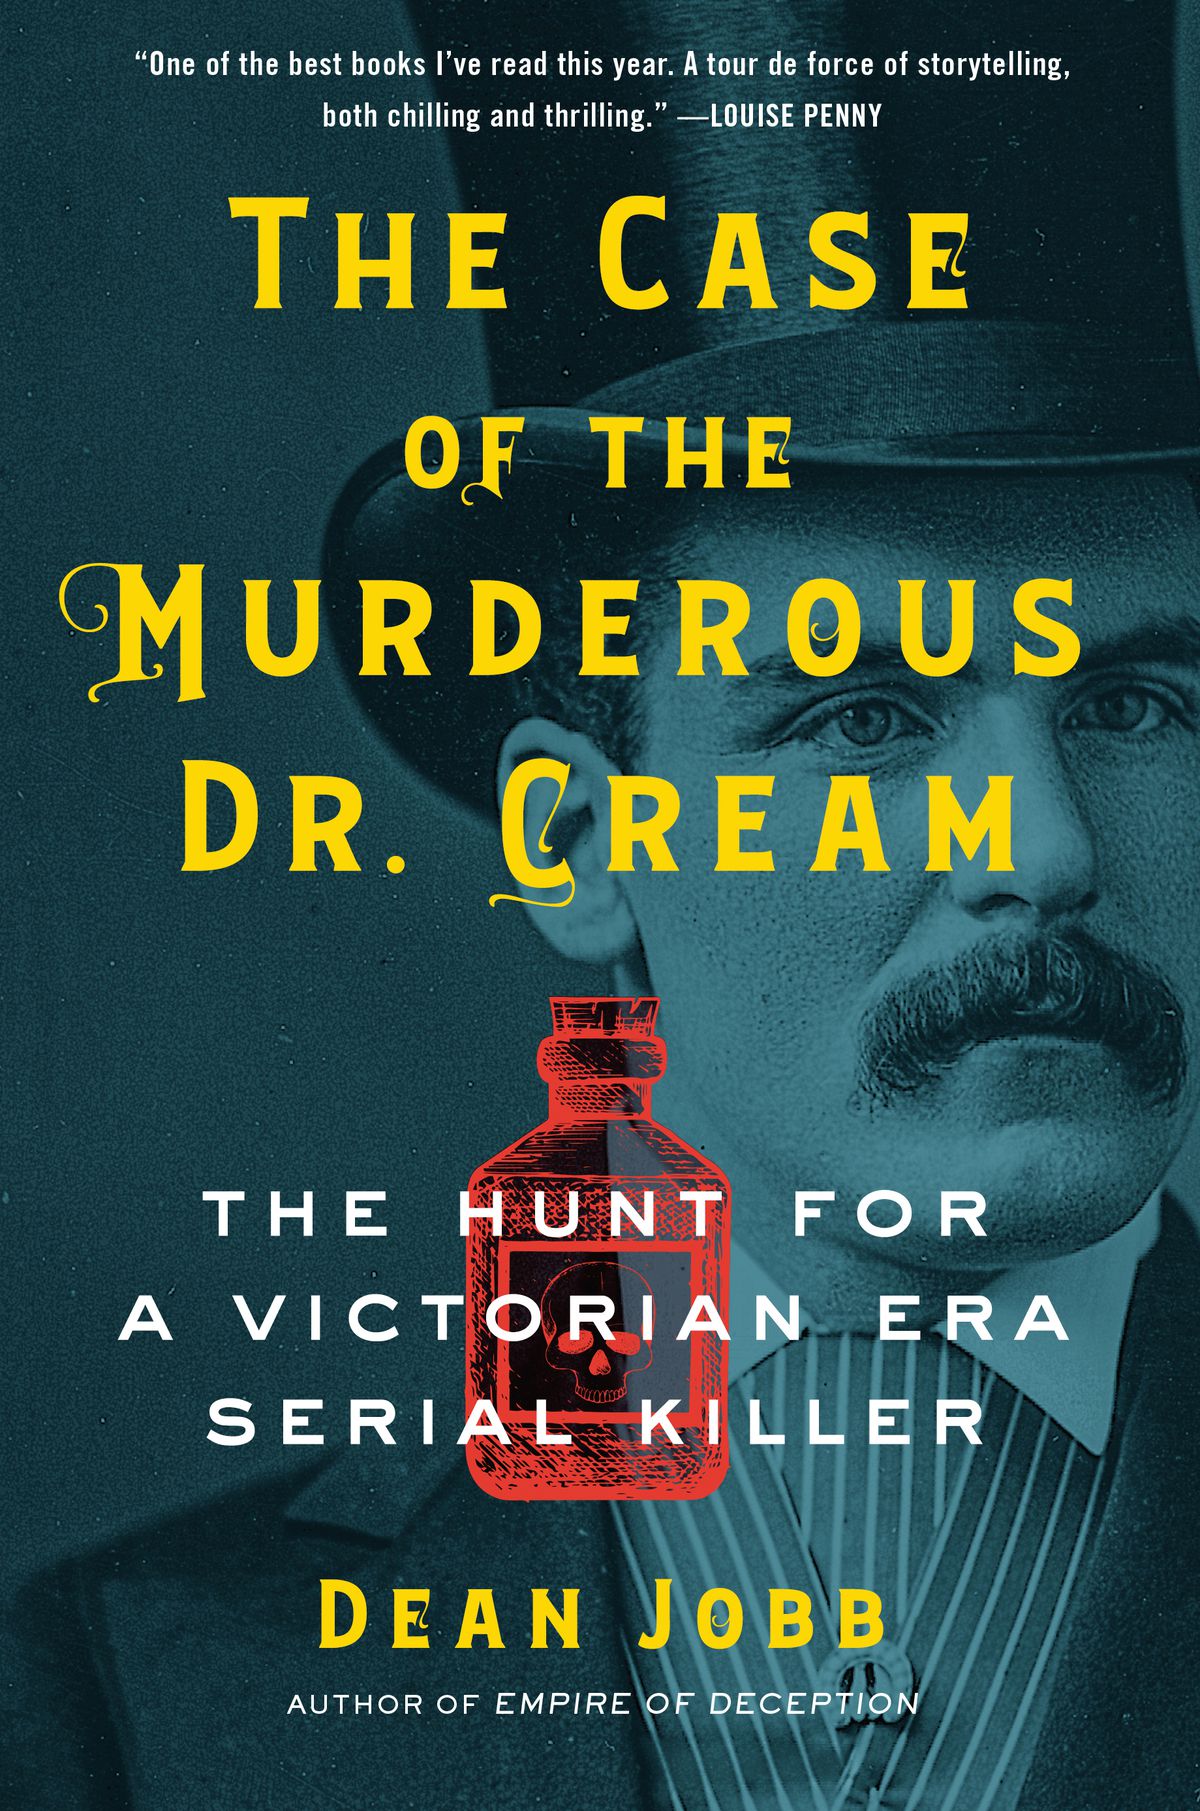 “The Case of the Murderous Dr. Cream: The Hunt for a Victorian Era Serial Killer.”